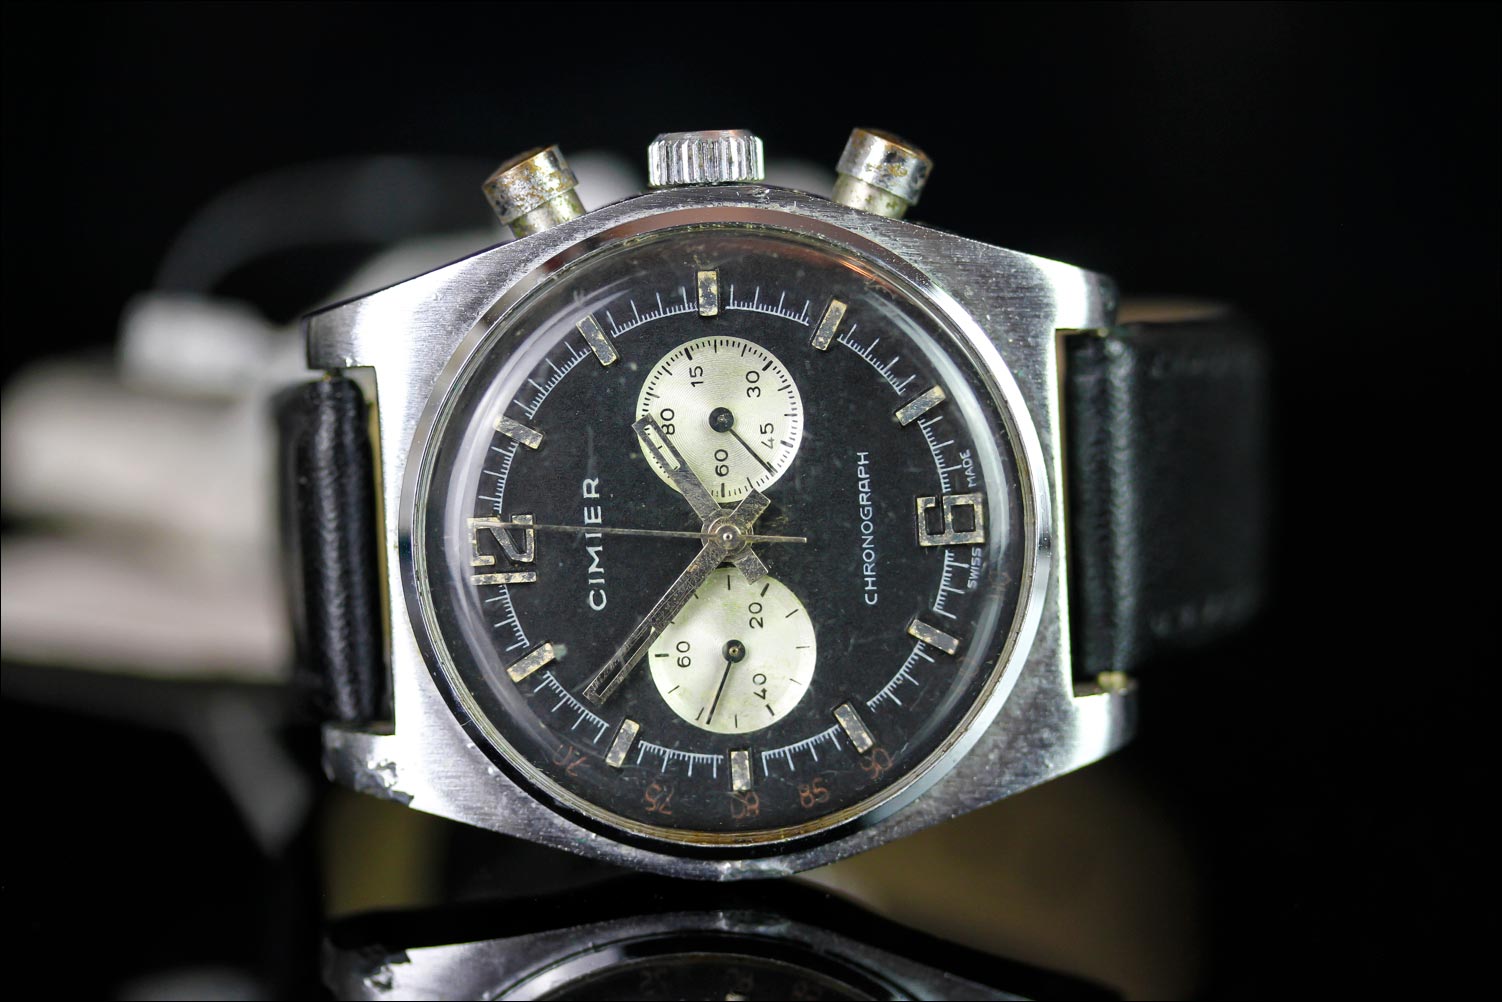 GENTLEMENS CIMIER VINTAGE CHRONOGRAPH WRISTWATCH, circular black dial with hour markers, 80 minute